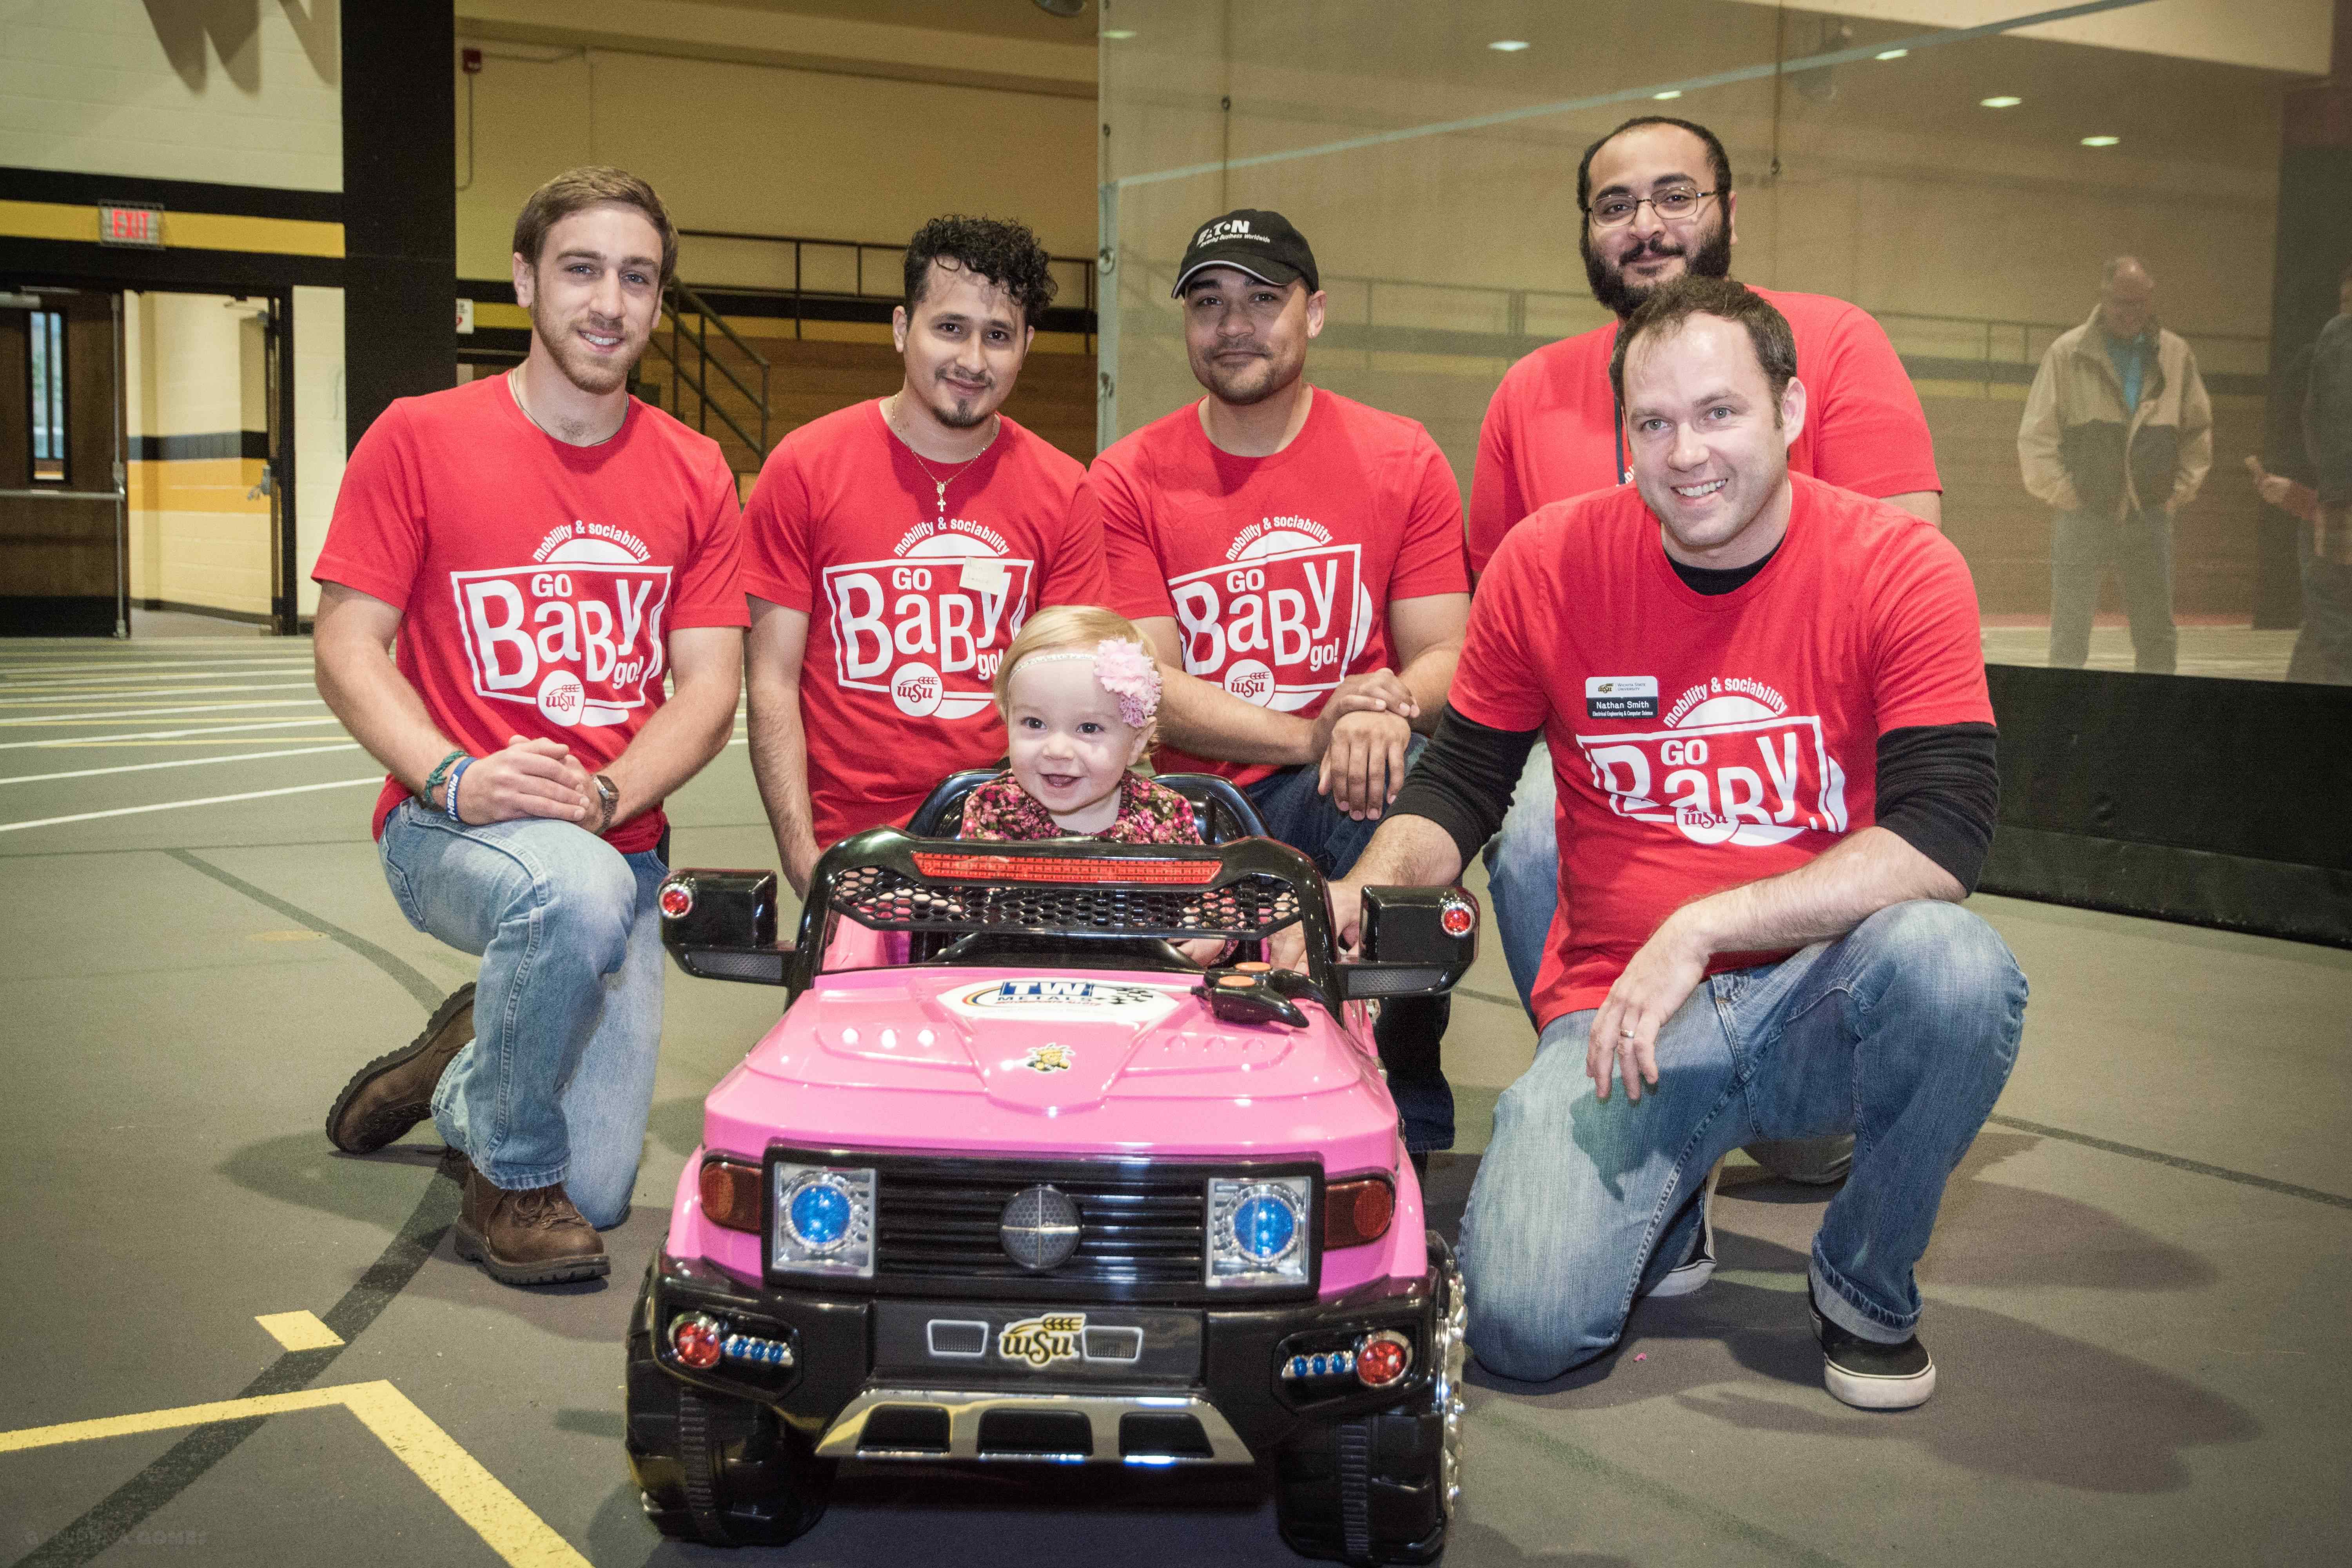 Engineering students pose in front of electric car for Go Baby Go.